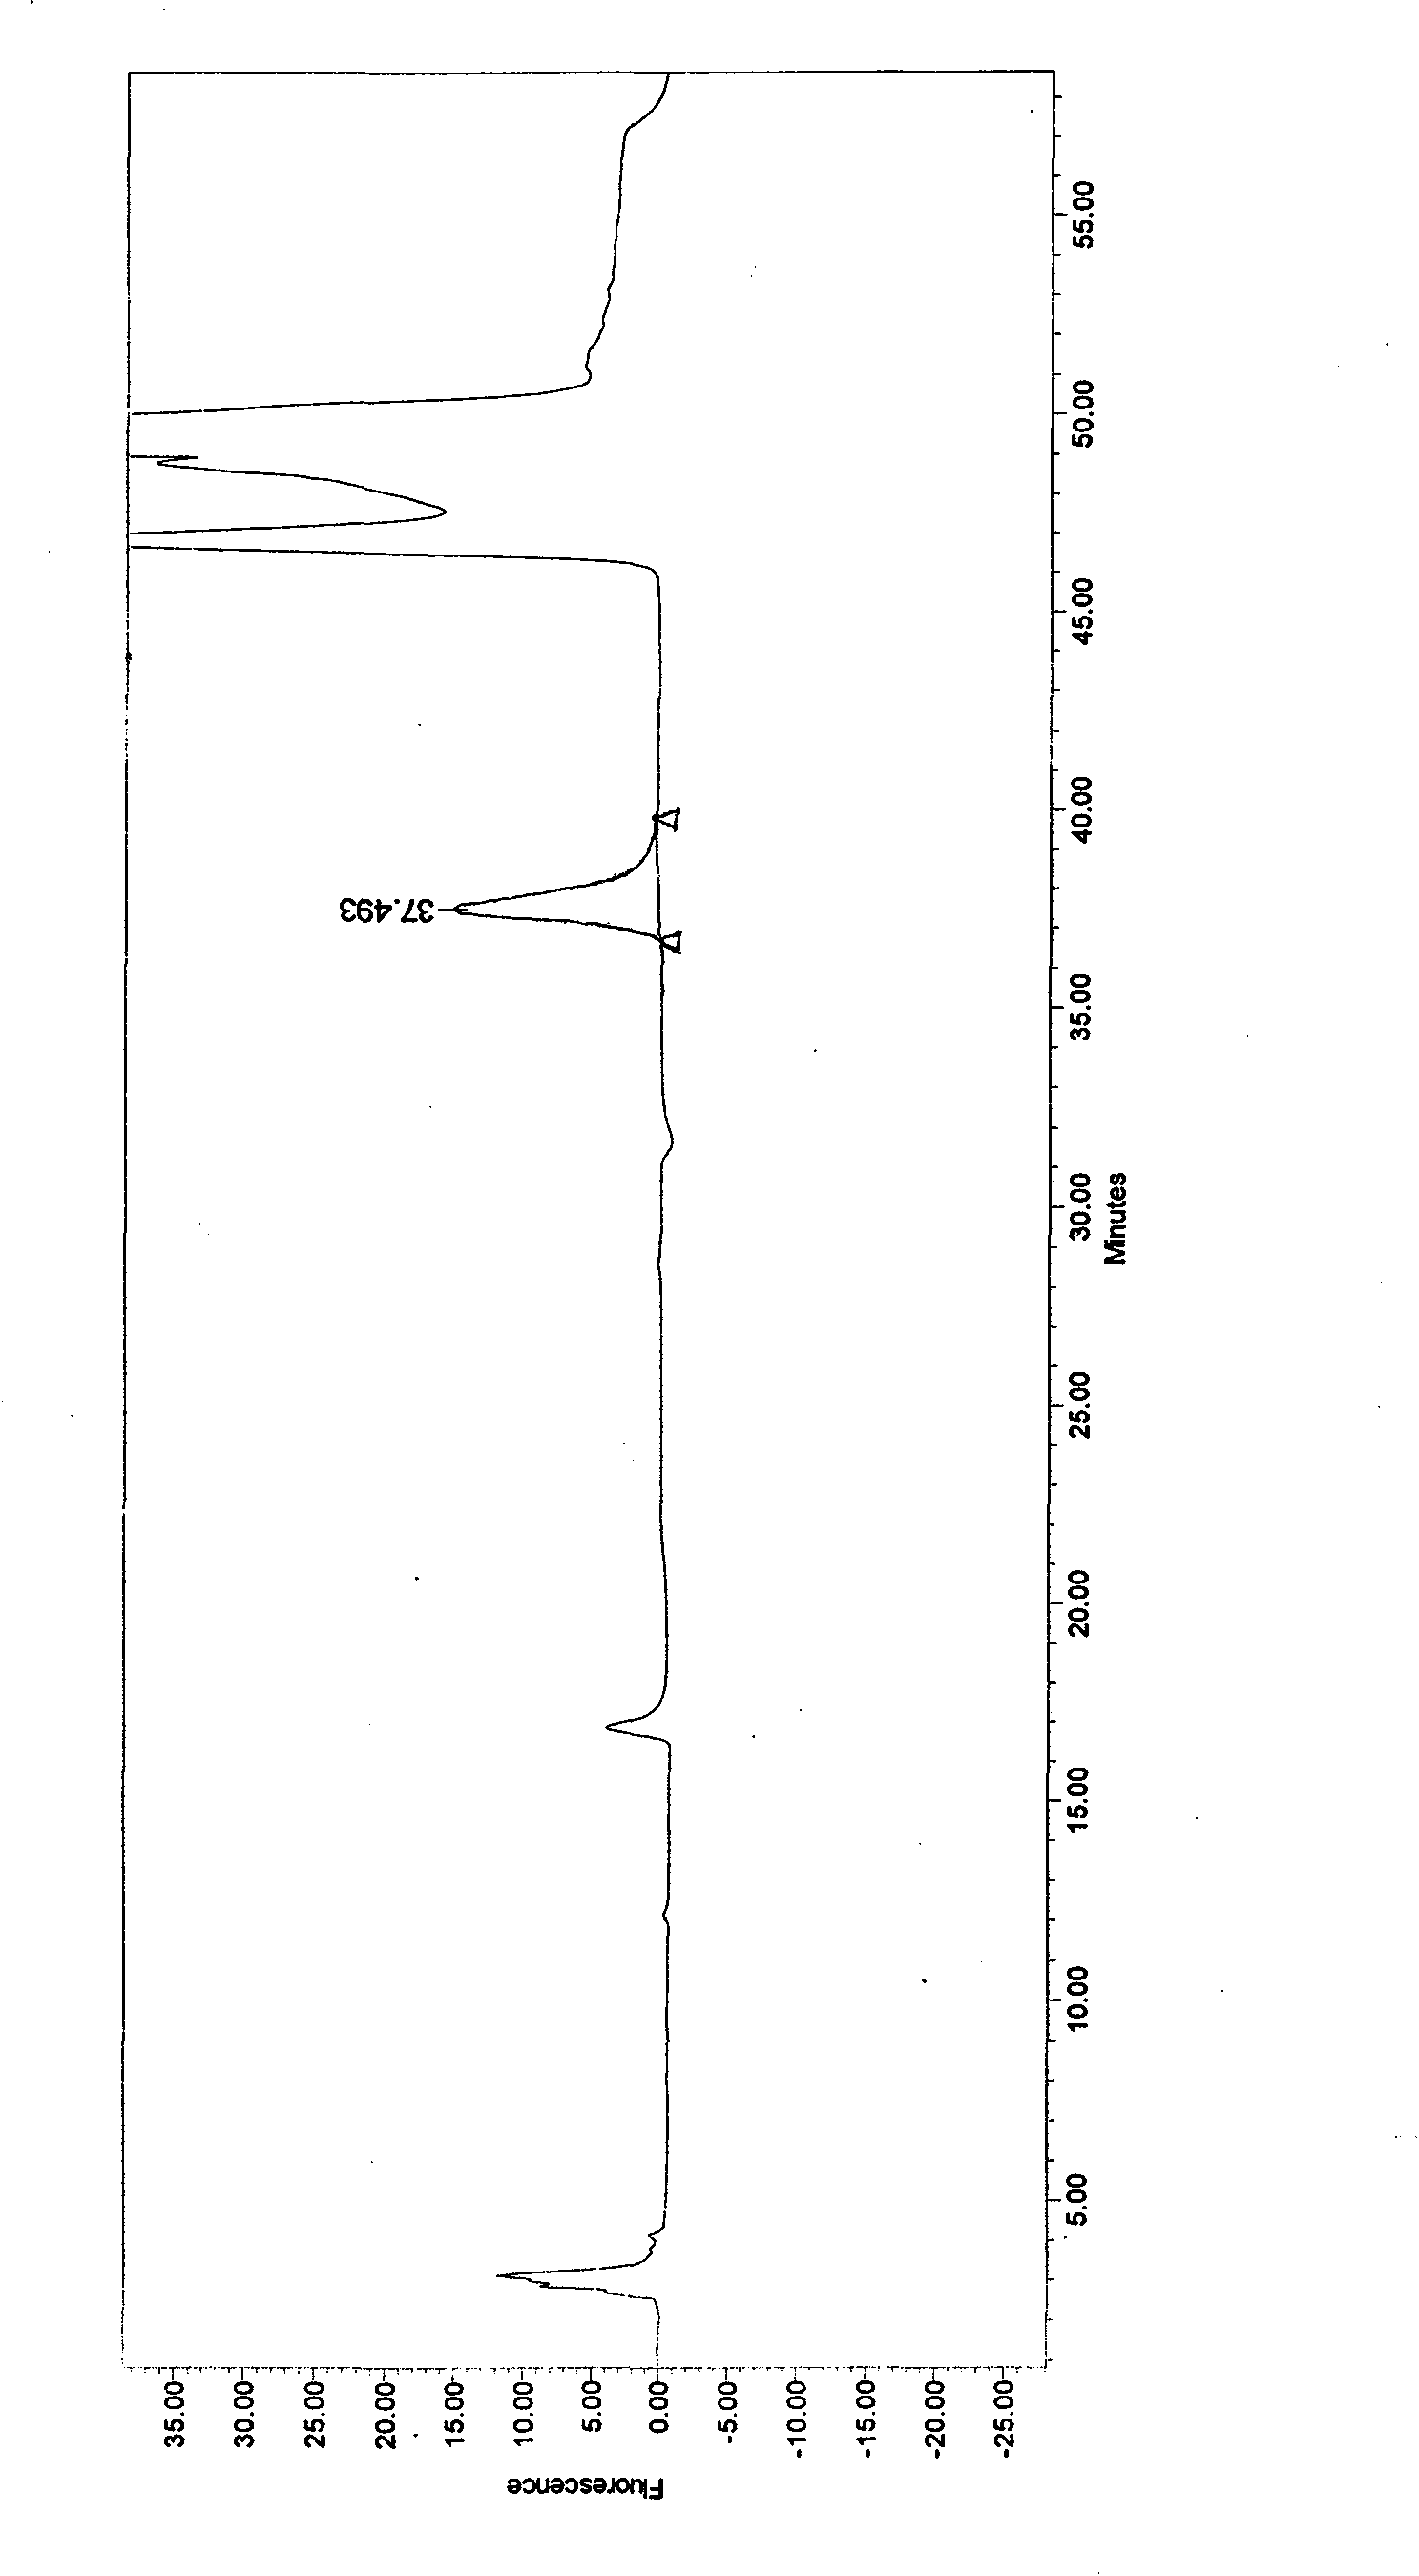 Method for detecting ethyl carbamate in yellow wine